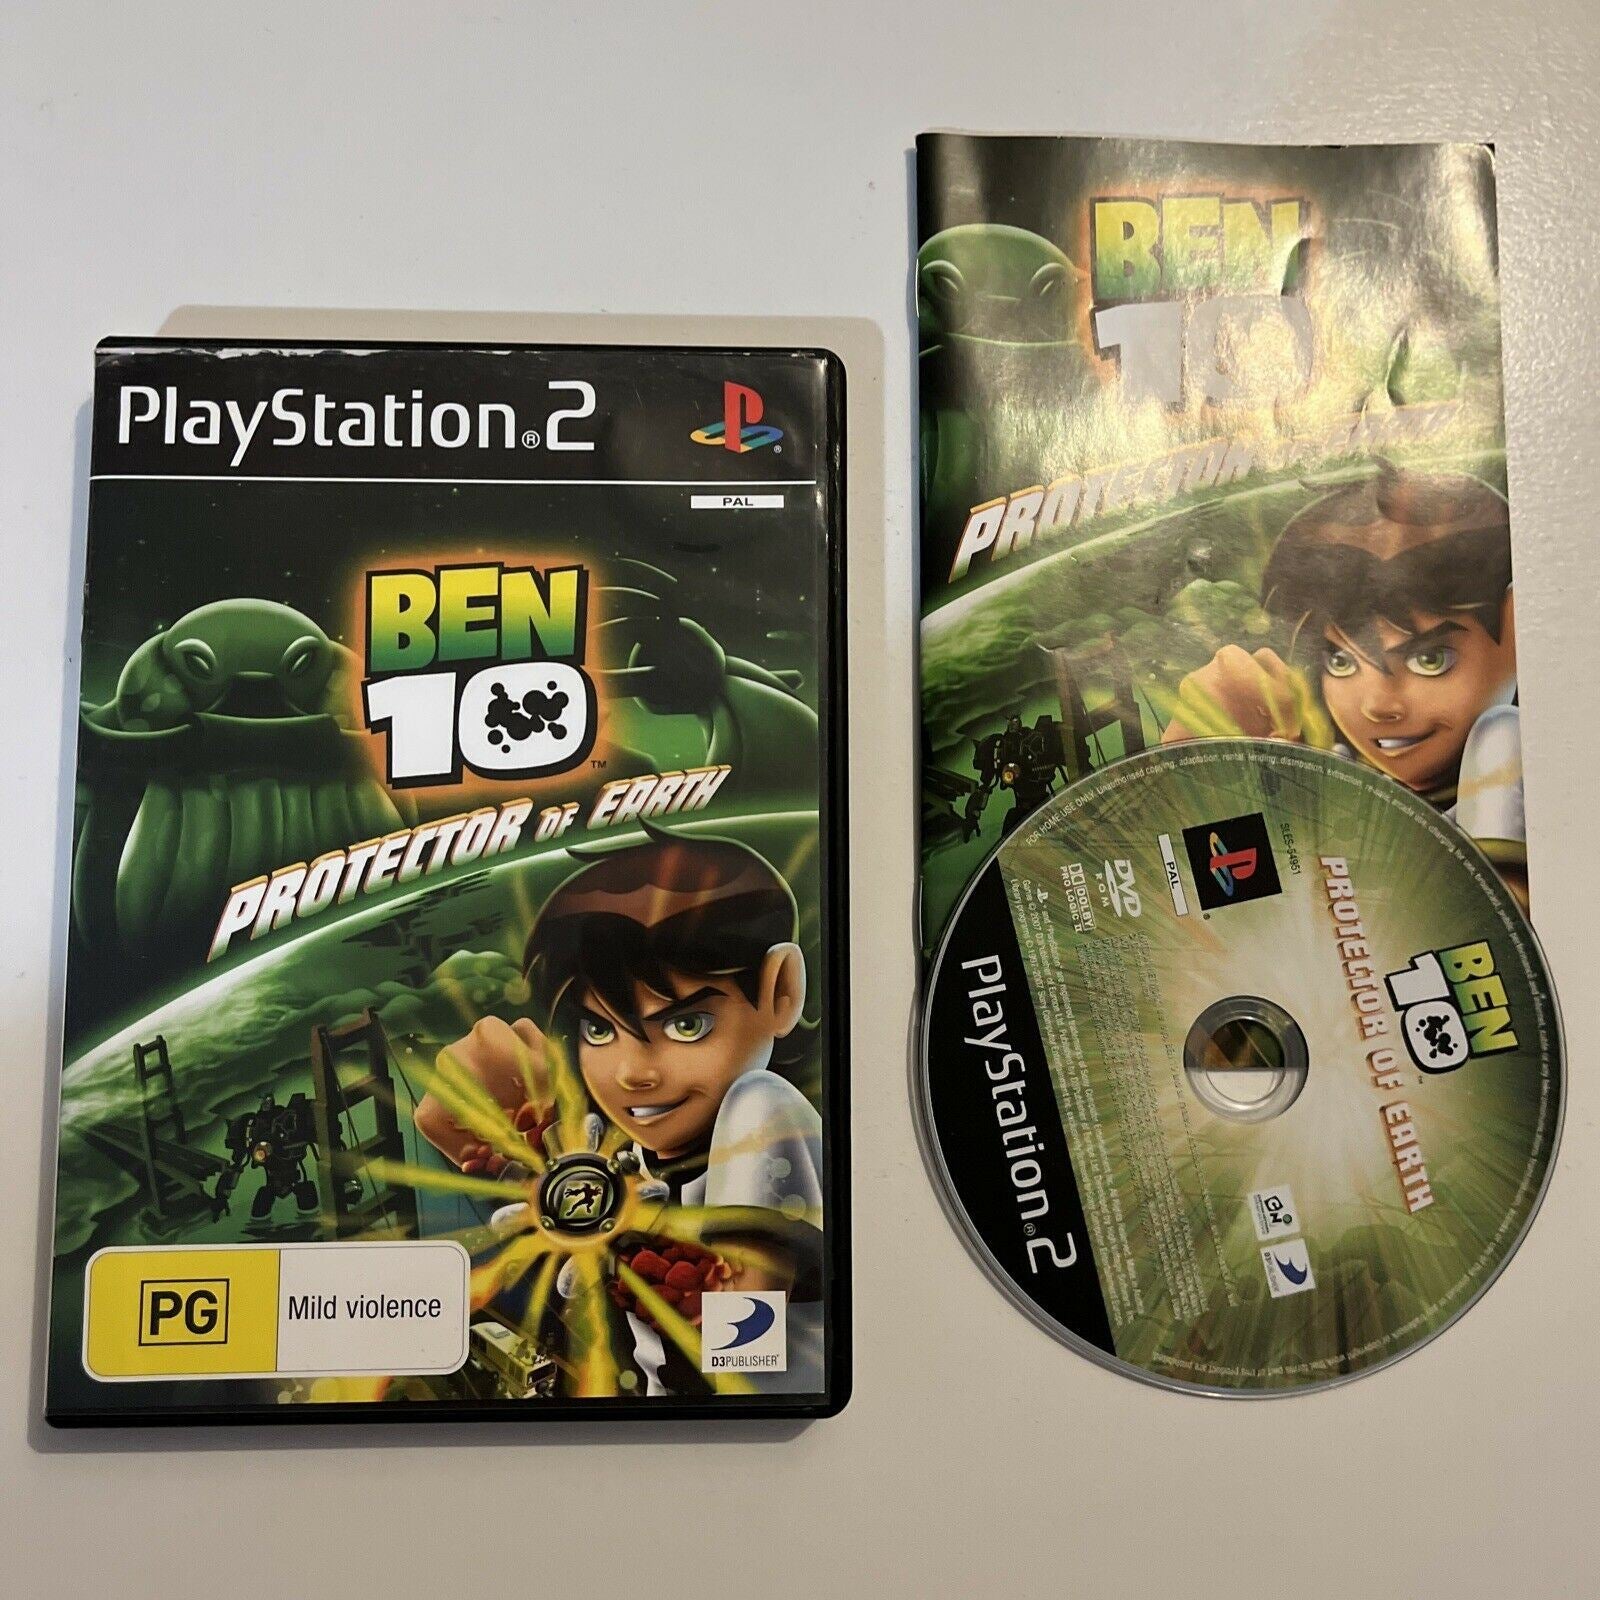 Ben 10 Games for PS2 